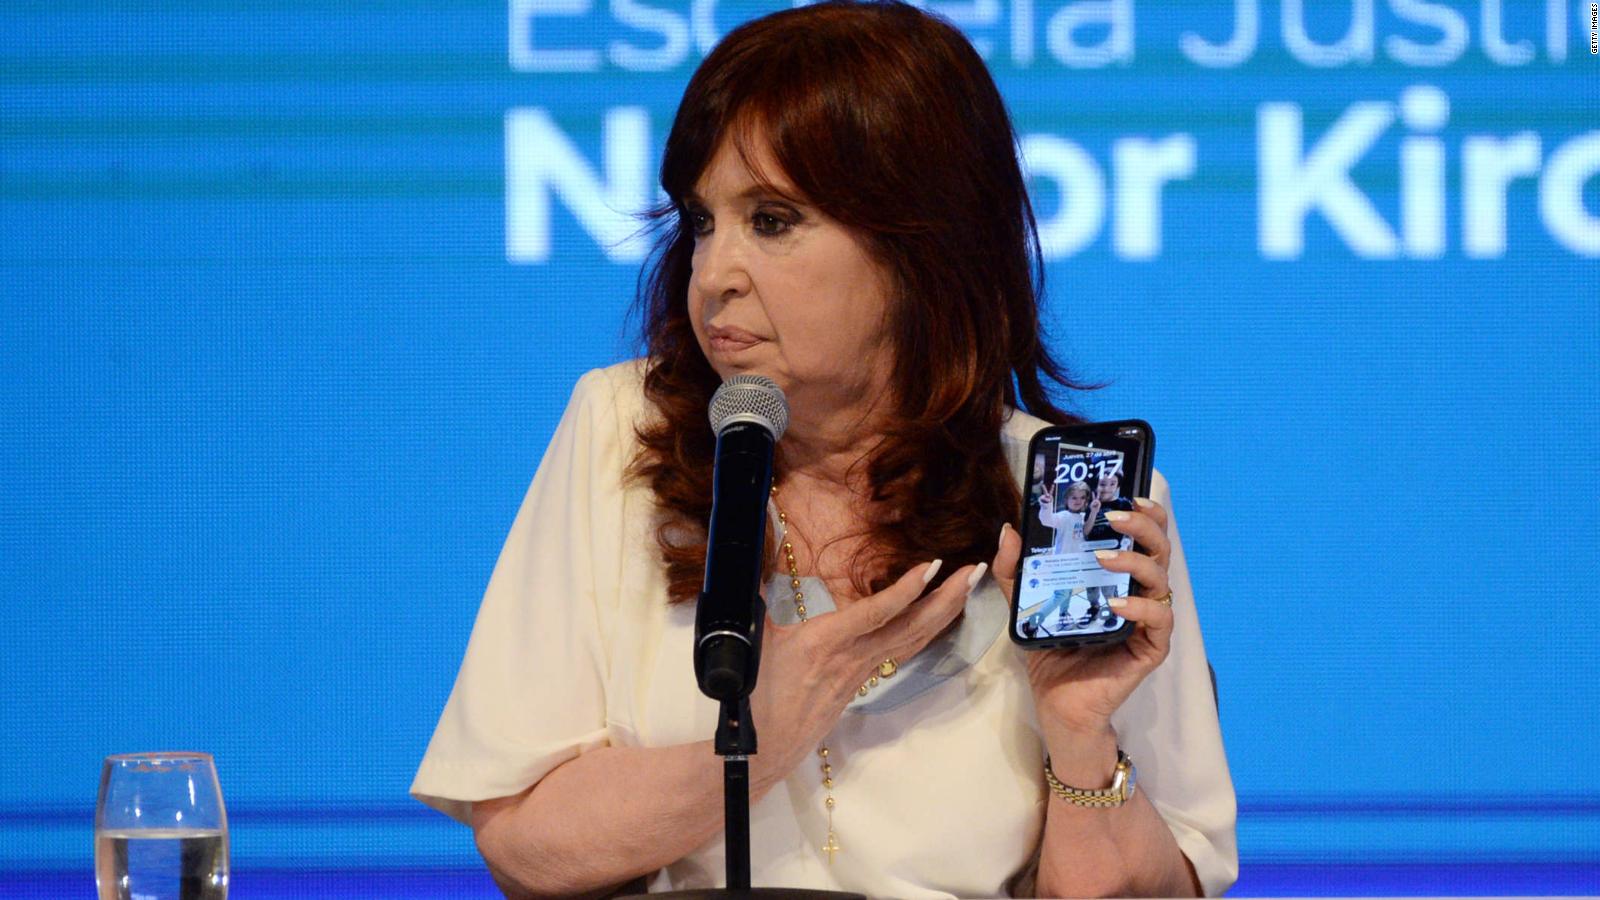 Cristina Kirchner on the elections: The important thing is to enter the ballot